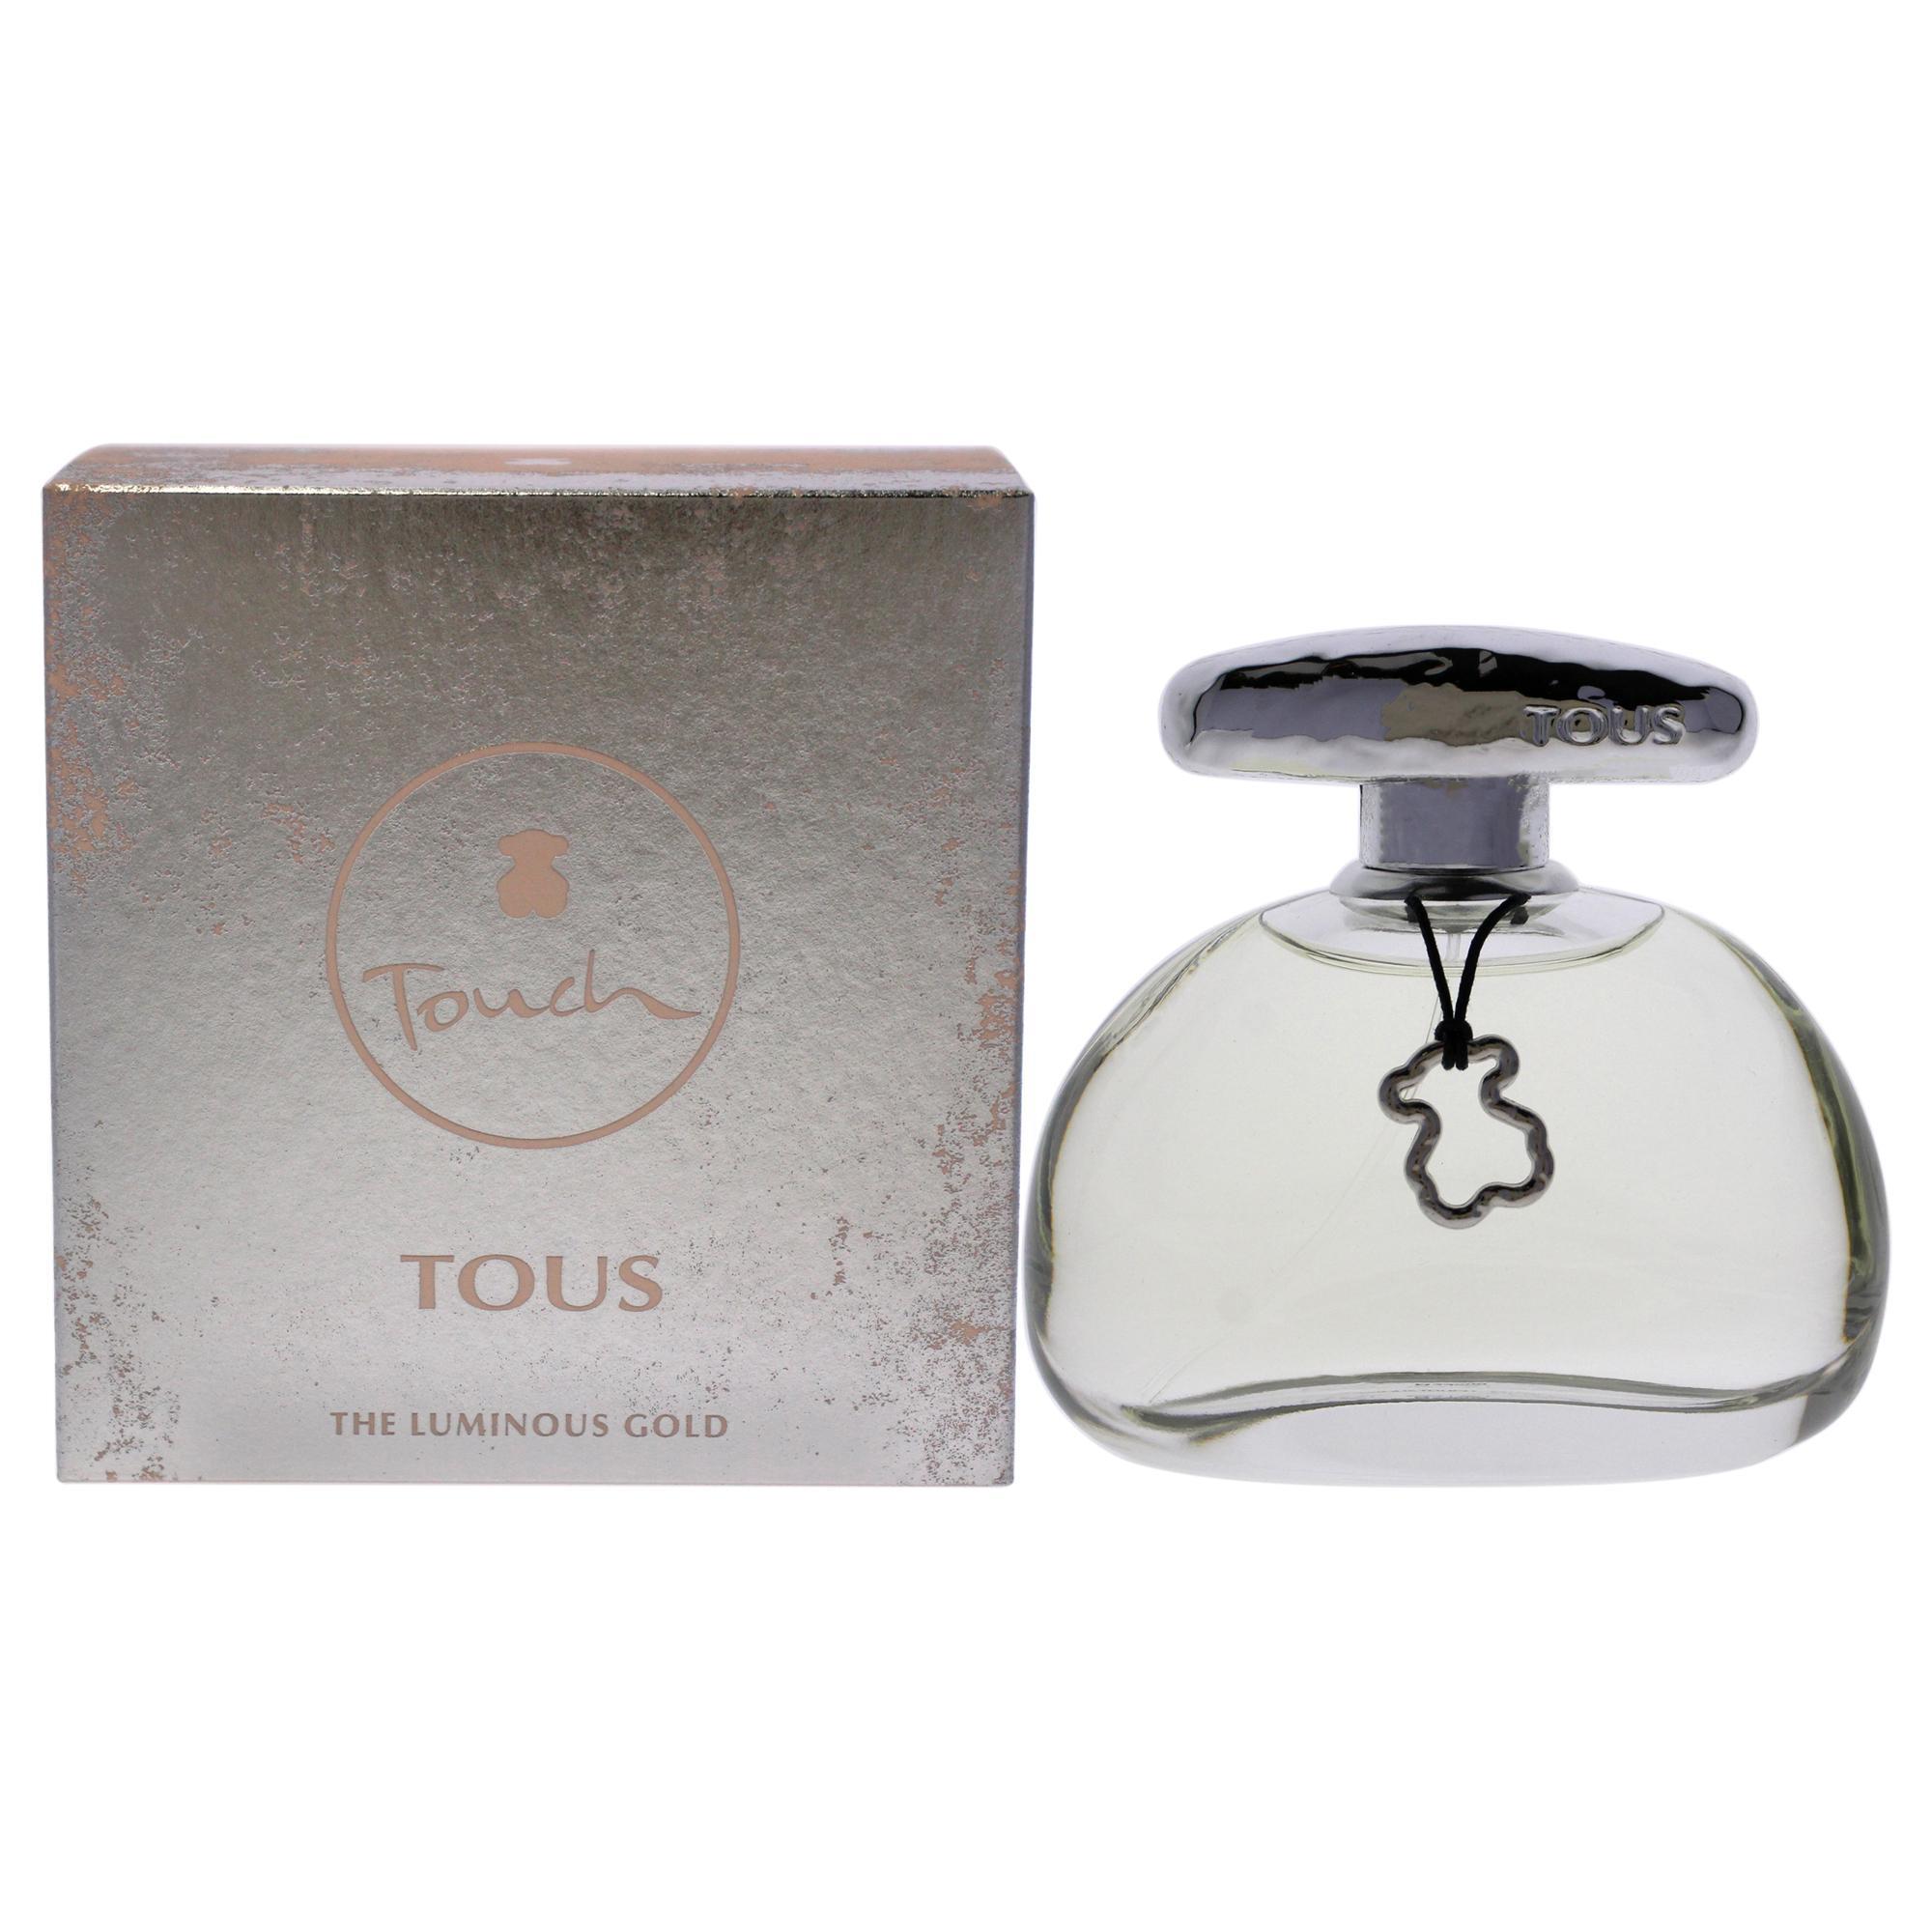 Touch The Luminous Gold by Tous for Women - 3.4 oz EDT Spray